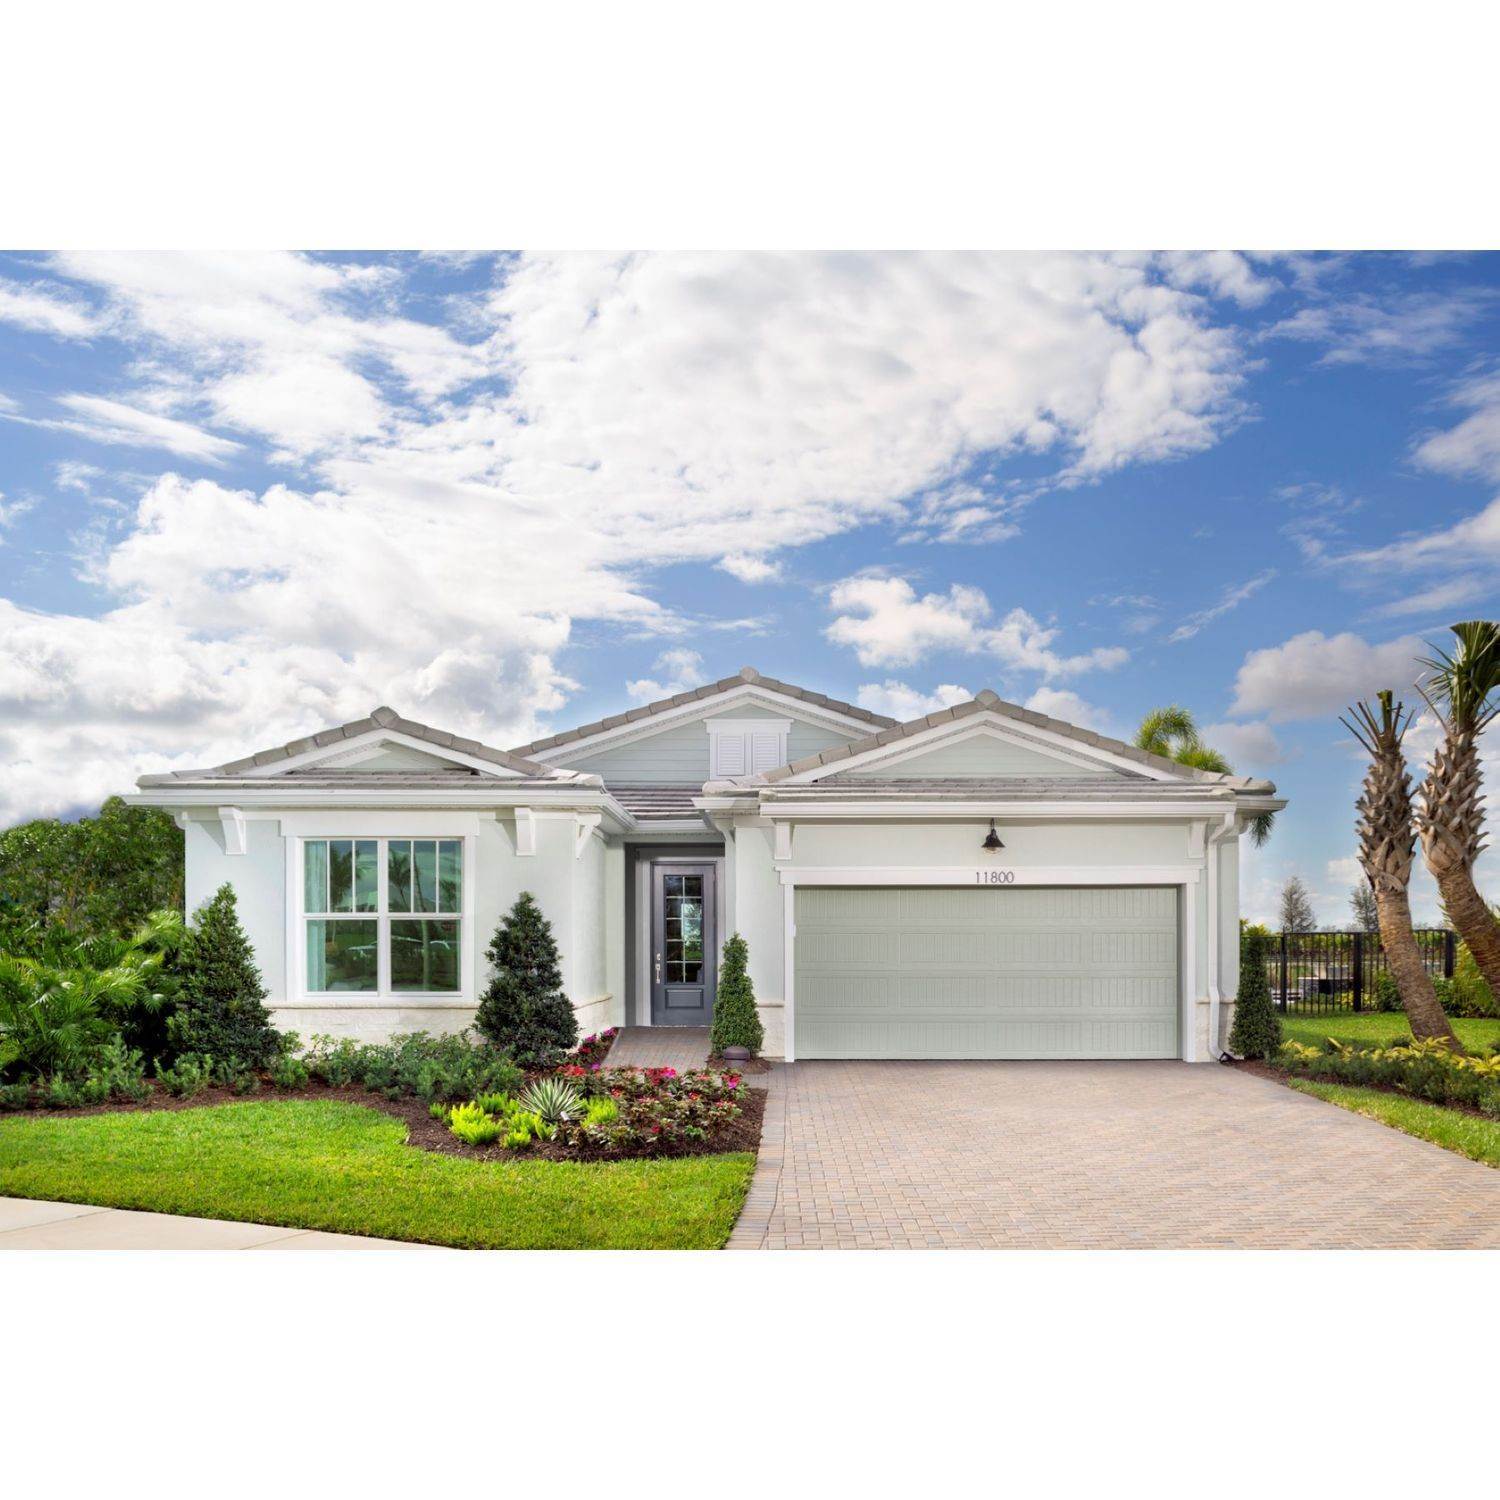 5. Tradition - Telaro xây dựng tại 11824 SW Antarus Ct, Port St. Lucie, FL 34987